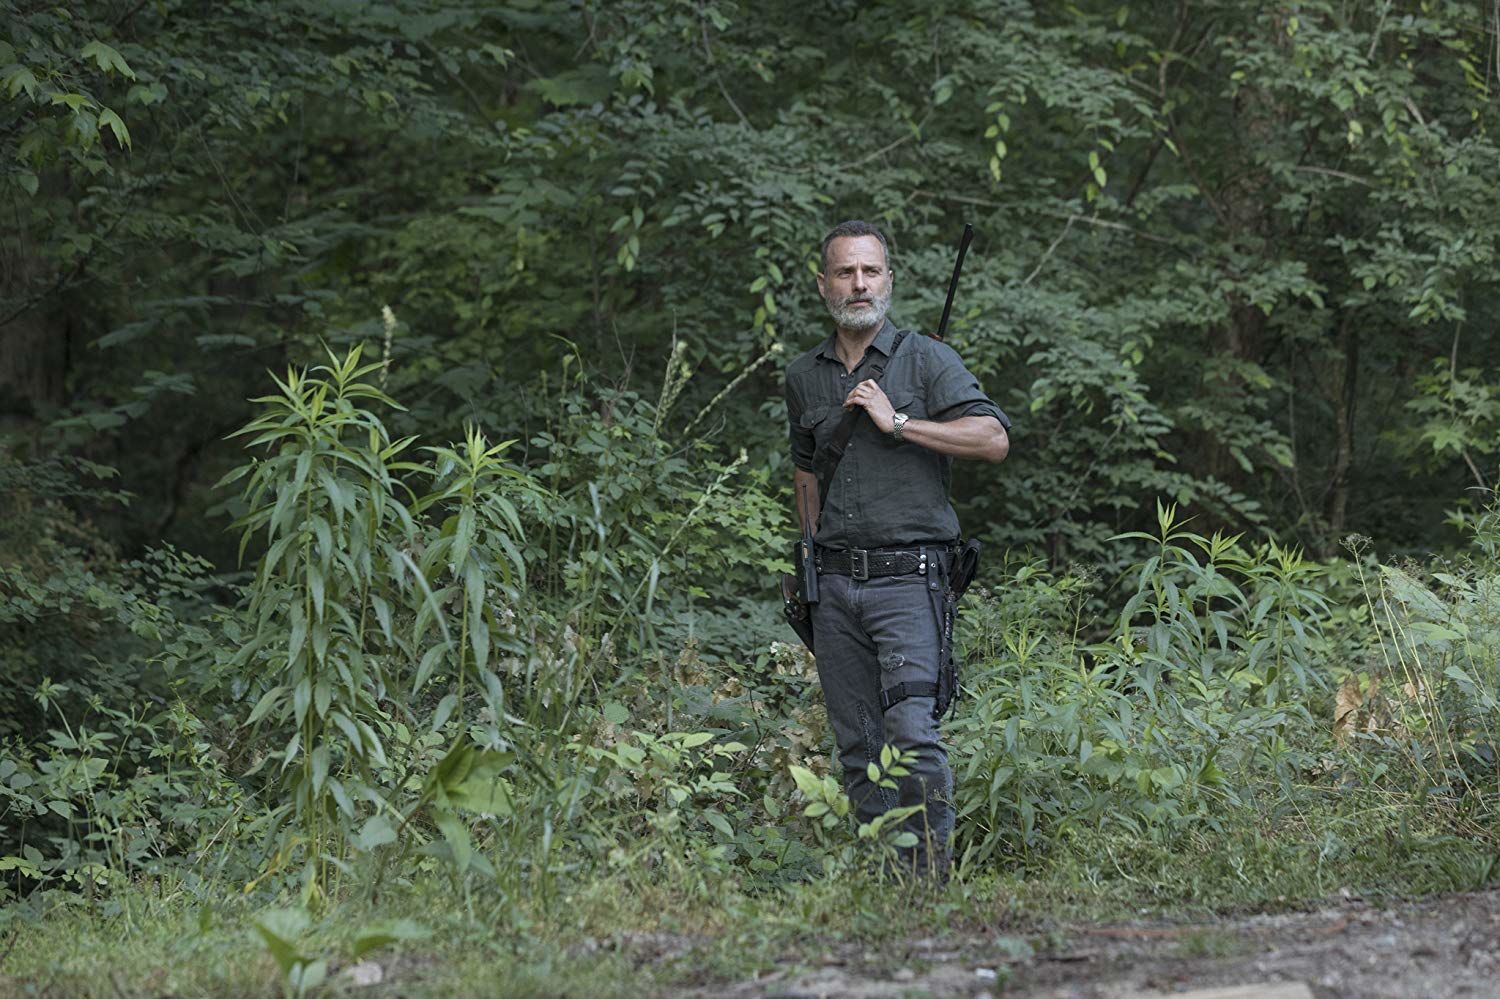 Andrew Lincoln The Walking Dead